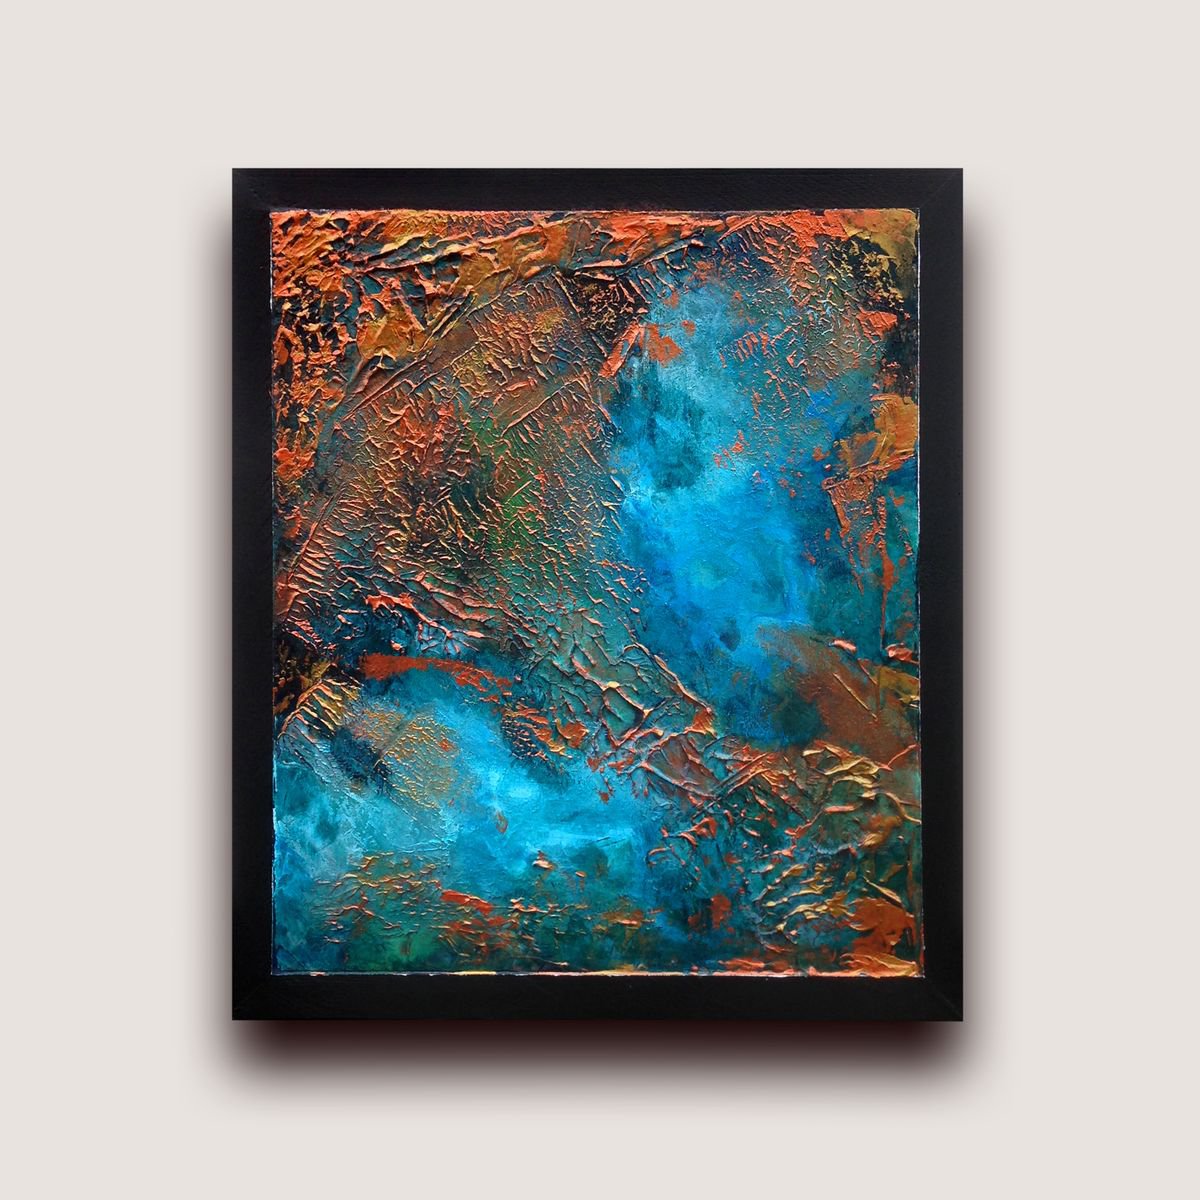 Abstract painting - Decay #8 by Matthew Withey